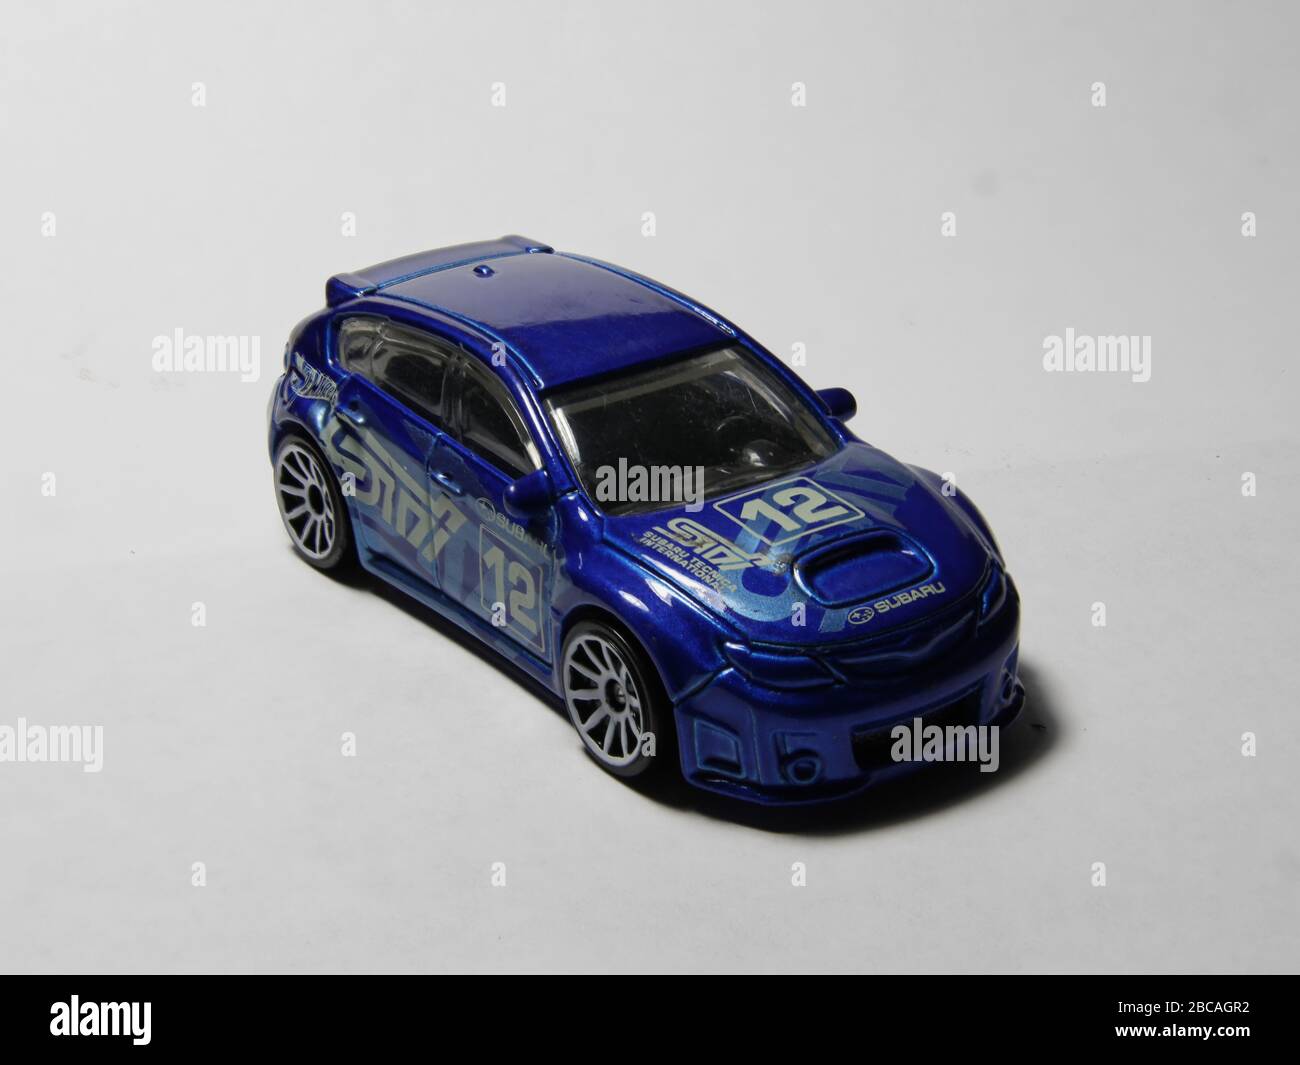 Subaru Rally car in rally blue. STI trim model rally spec wagon number 12. White wheels and traditional Subaru hood scoop. From four different angles. Stock Photo